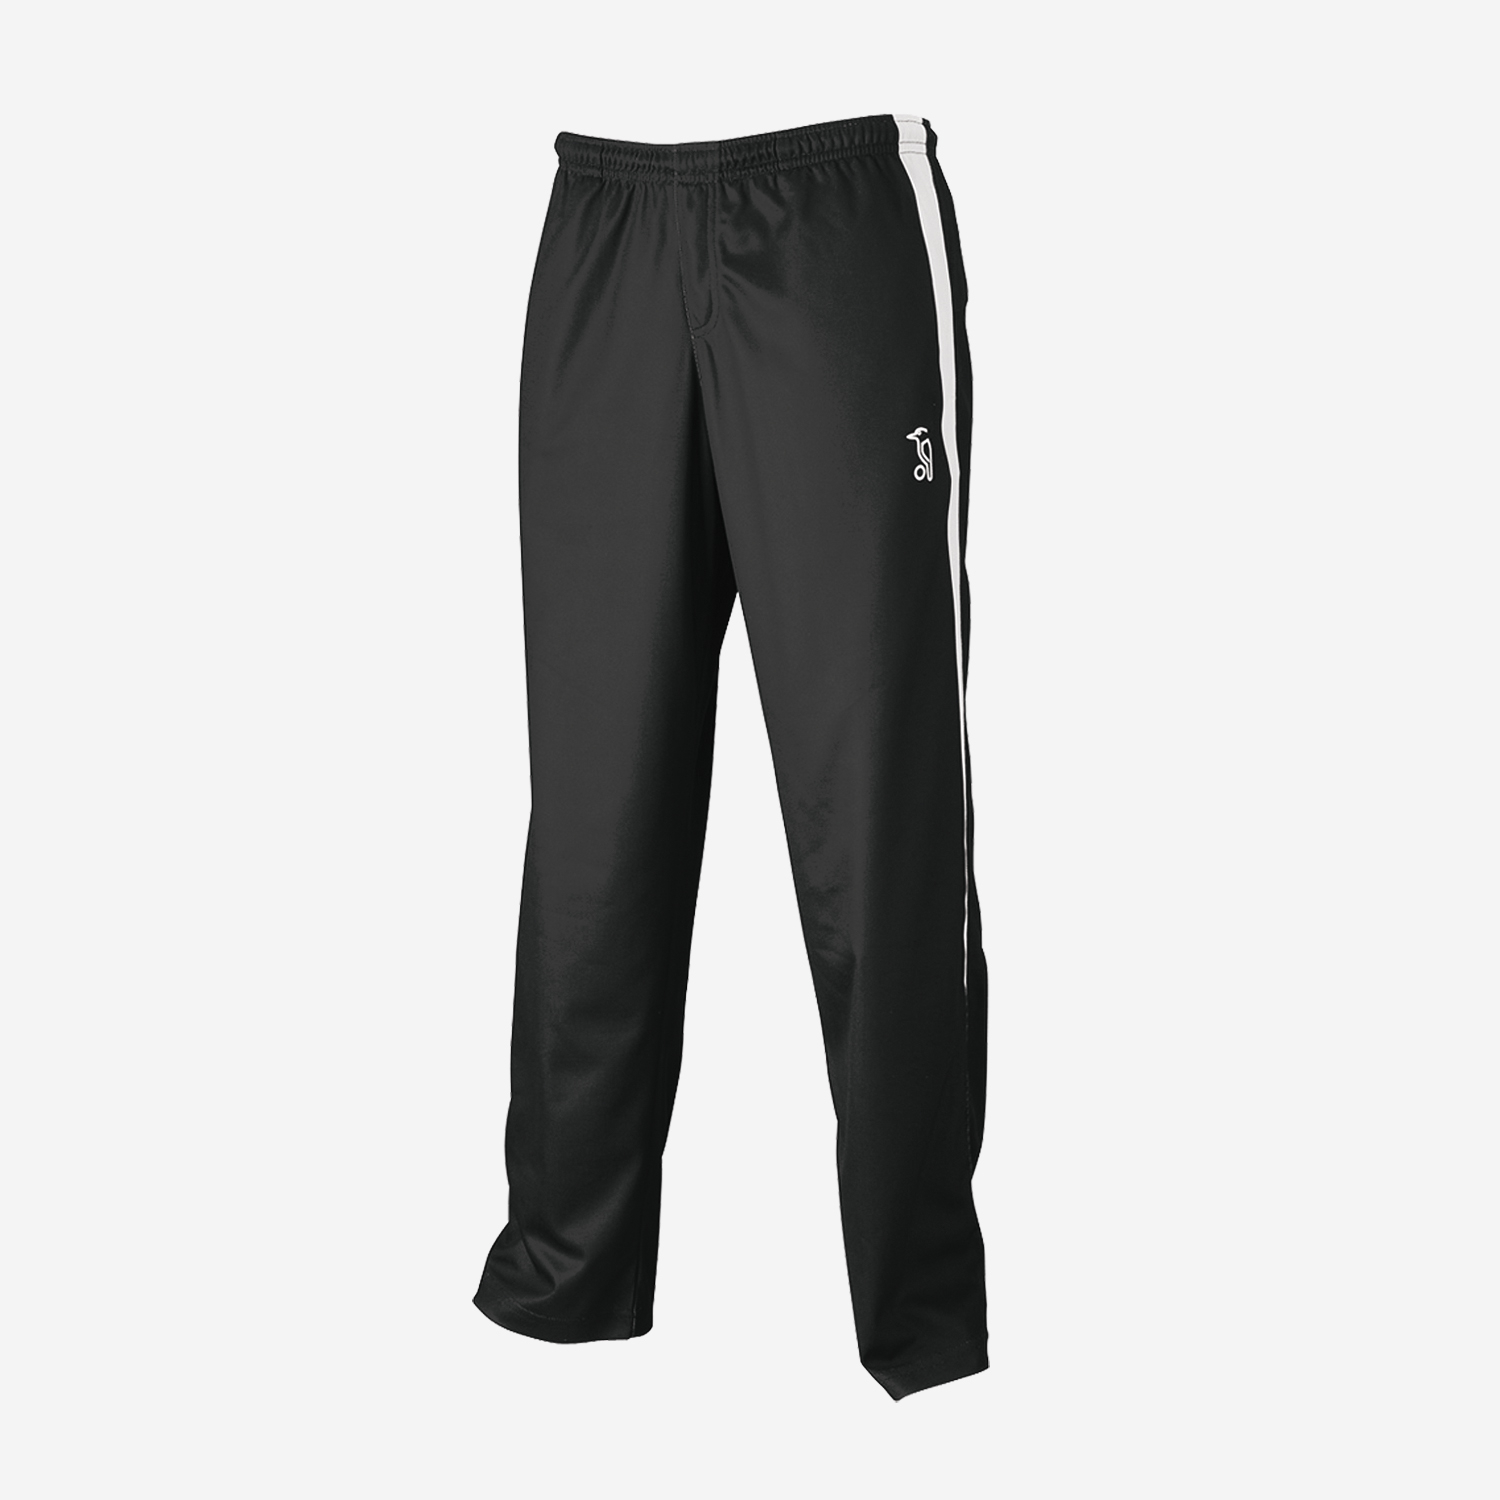 CRICKET PANTS – GAME DAY APPAREL